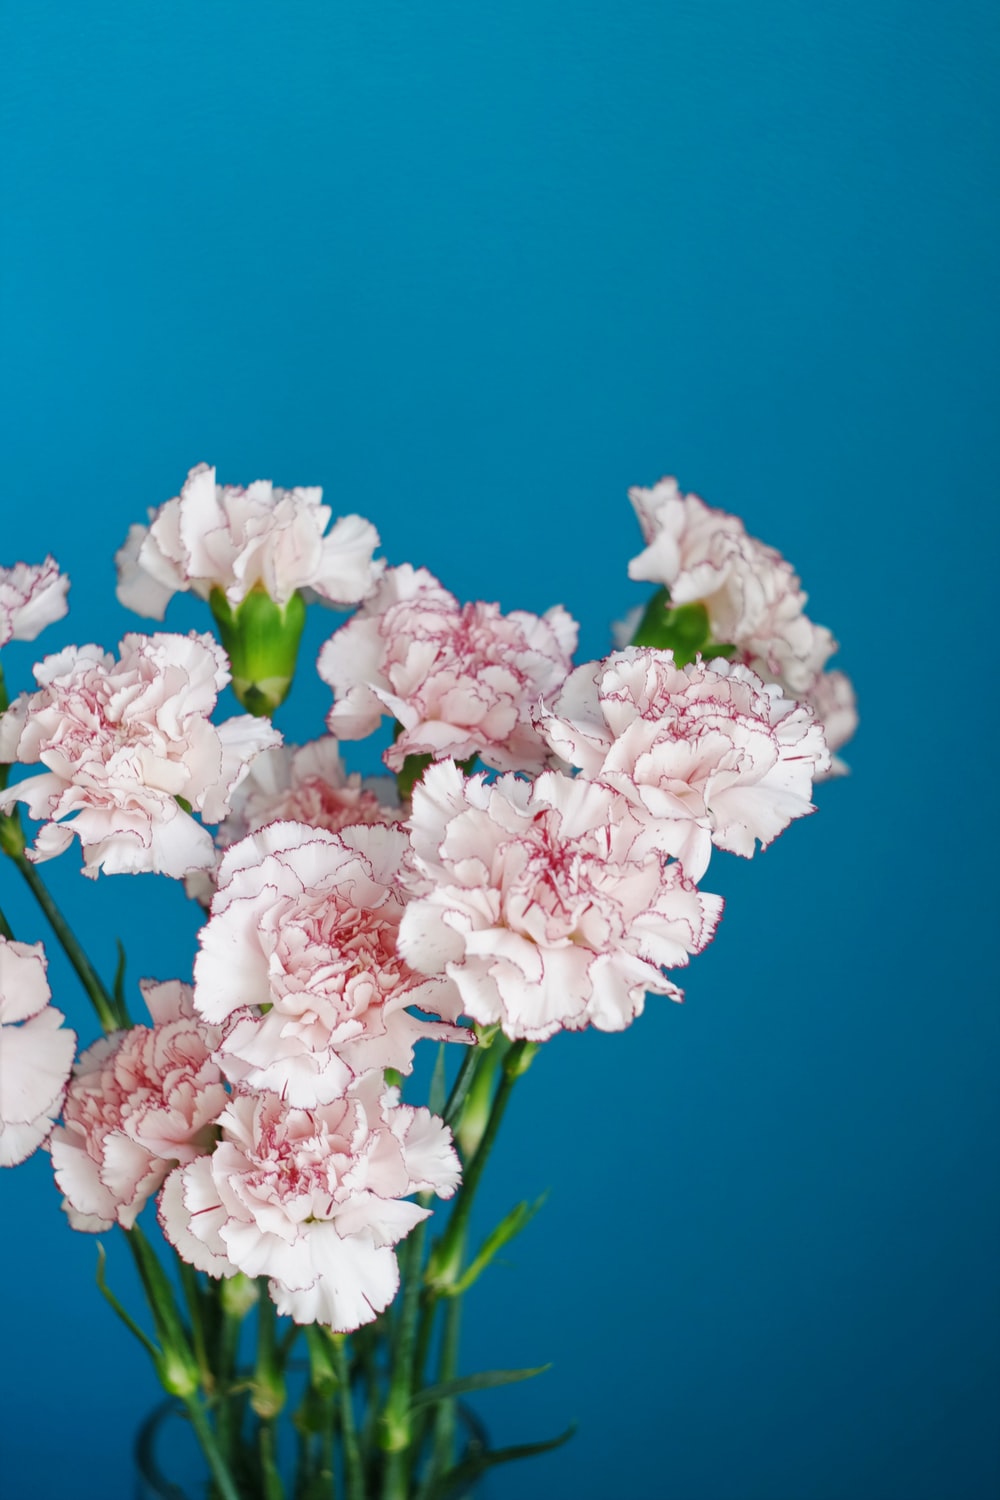 Delicate Flowers Picture. Download Free Image